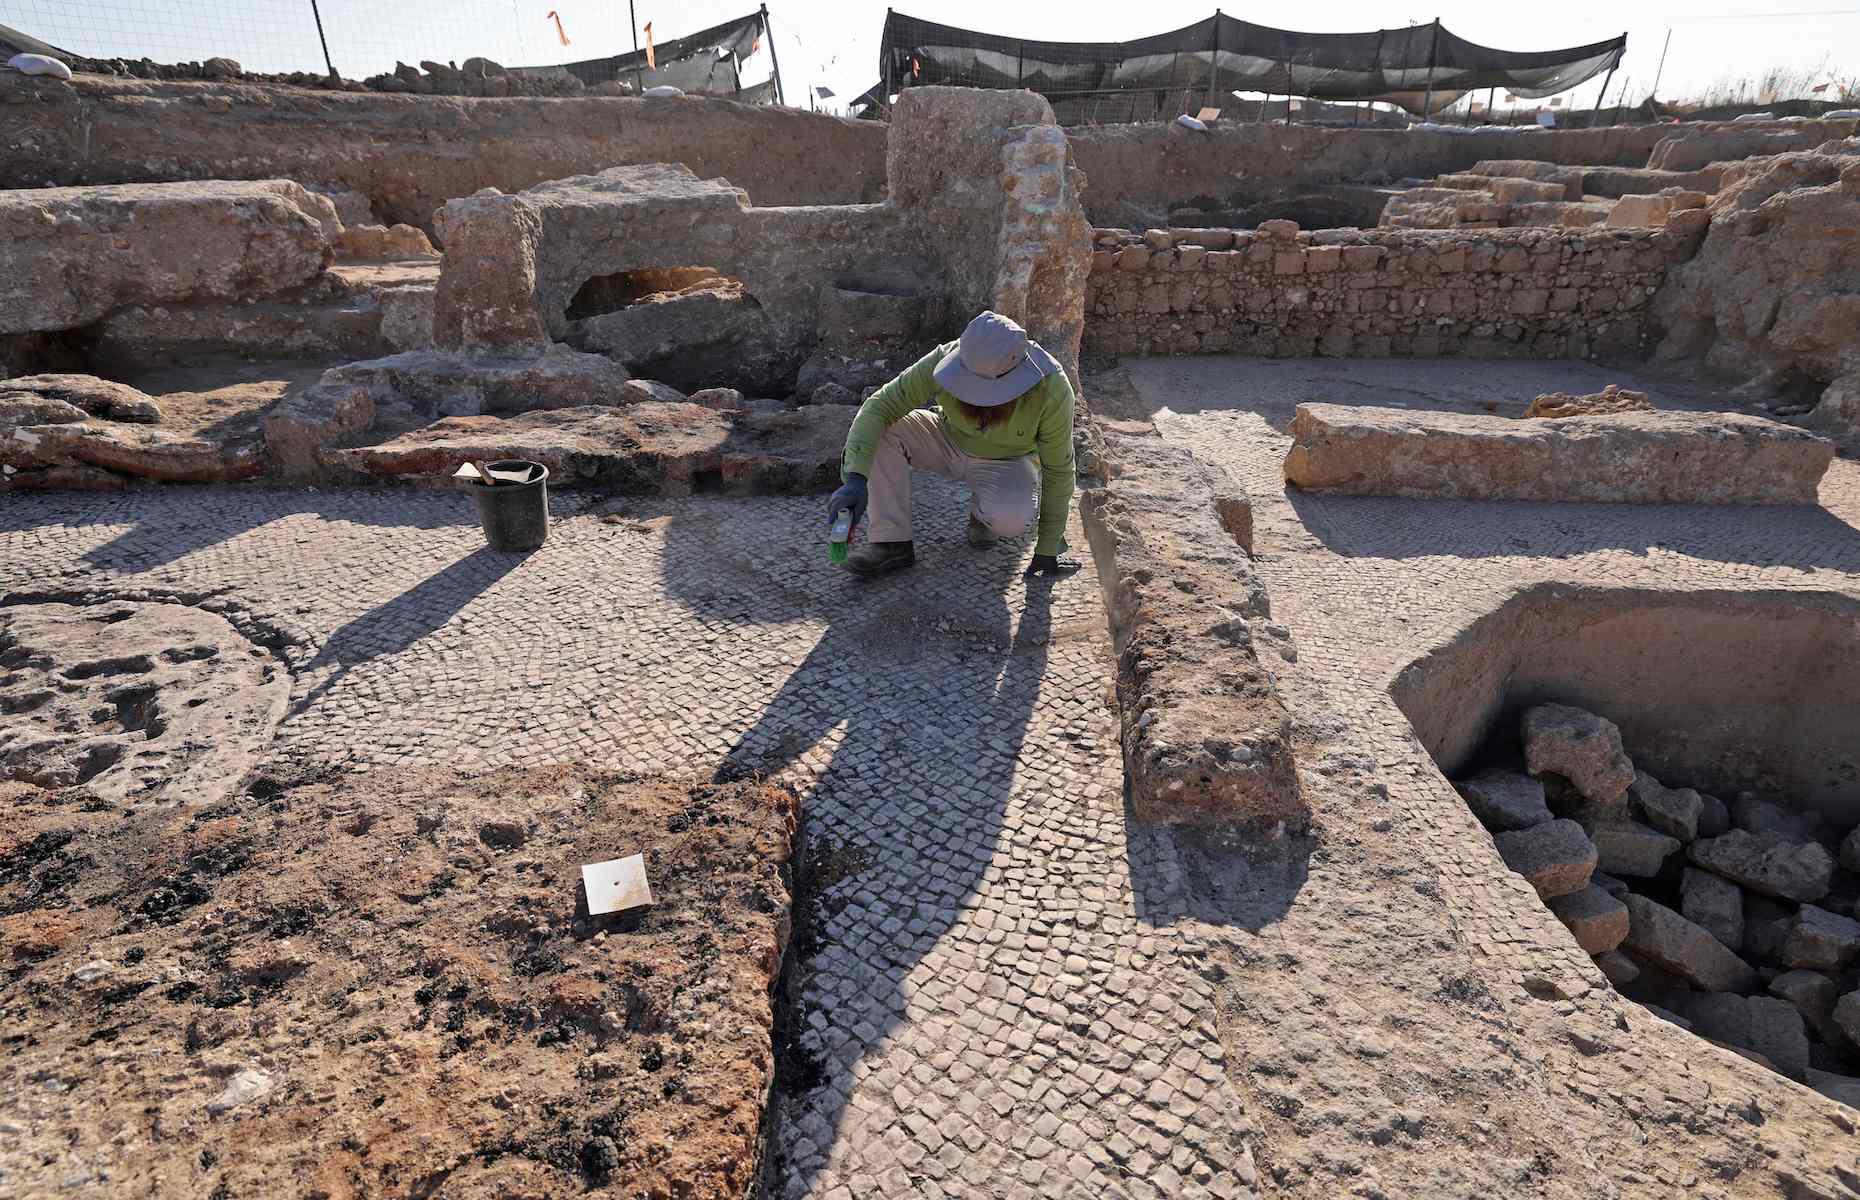 The find confirms that the region was at the centre of a flourishing wine trade, with archaeologists believing varietals from the Yavne factory were exported to Egypt, Turkey and Greece, as well as possibly southern Italy. According to the Israel Antiquities Authority, the factory produced ‘Gaza wine’, a light white prestige wine.